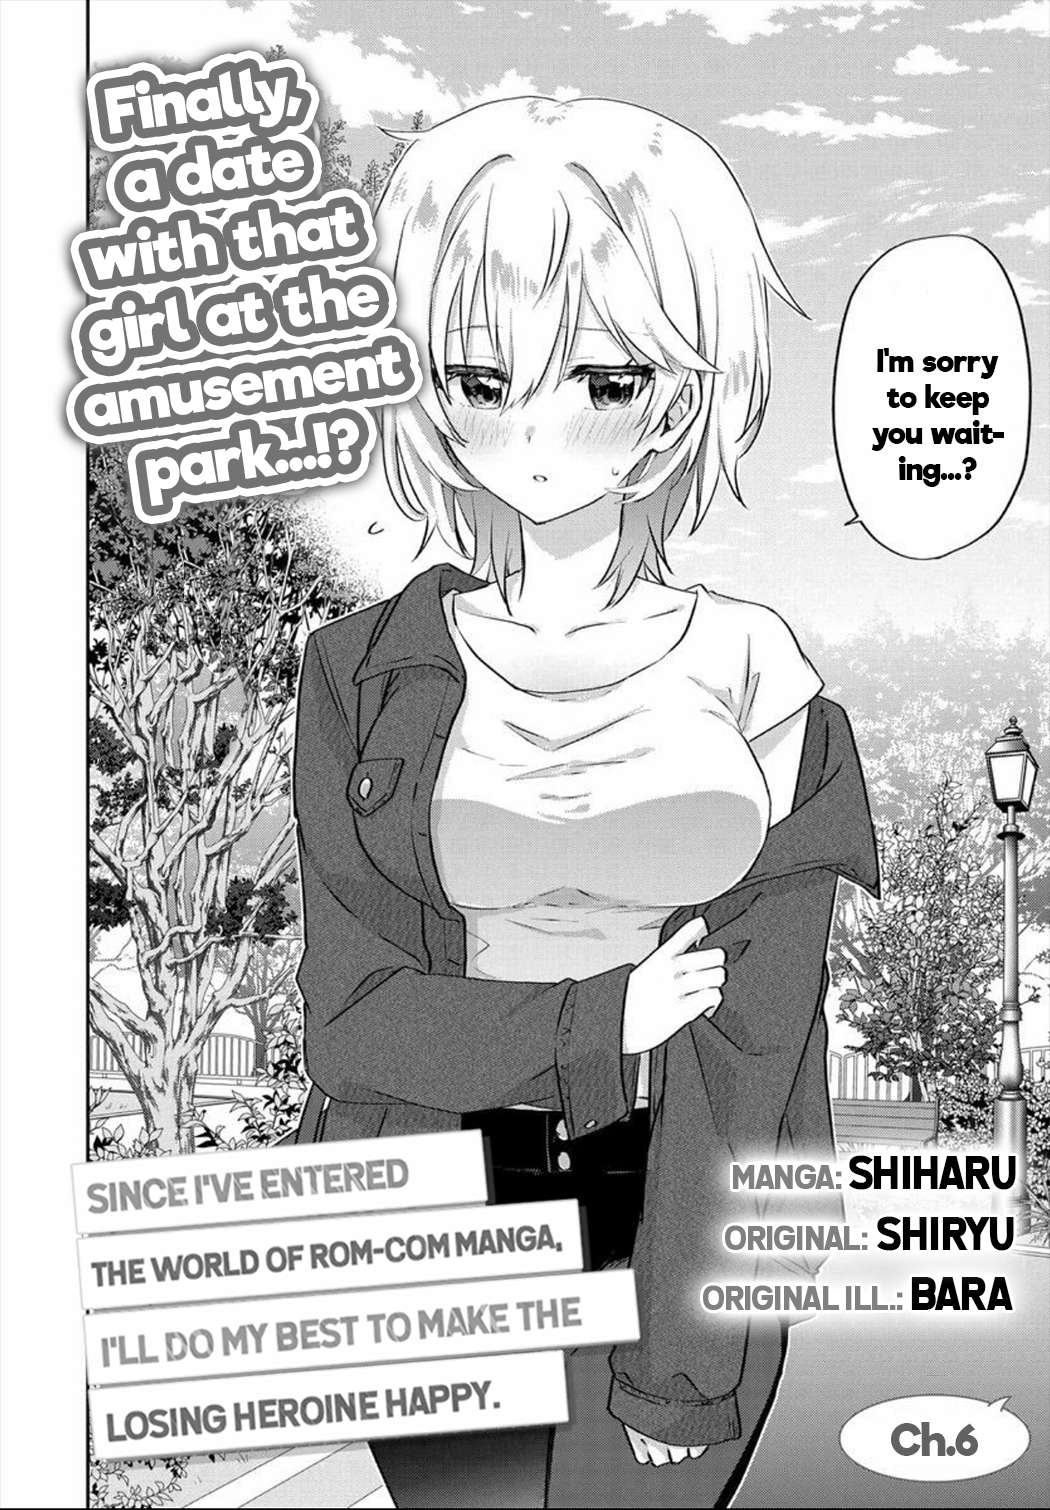 Since I’Ve Entered The World Of Romantic Comedy Manga, I’Ll Do My Best To Make The Losing Heroine Happy - chapter 6.1 - #2